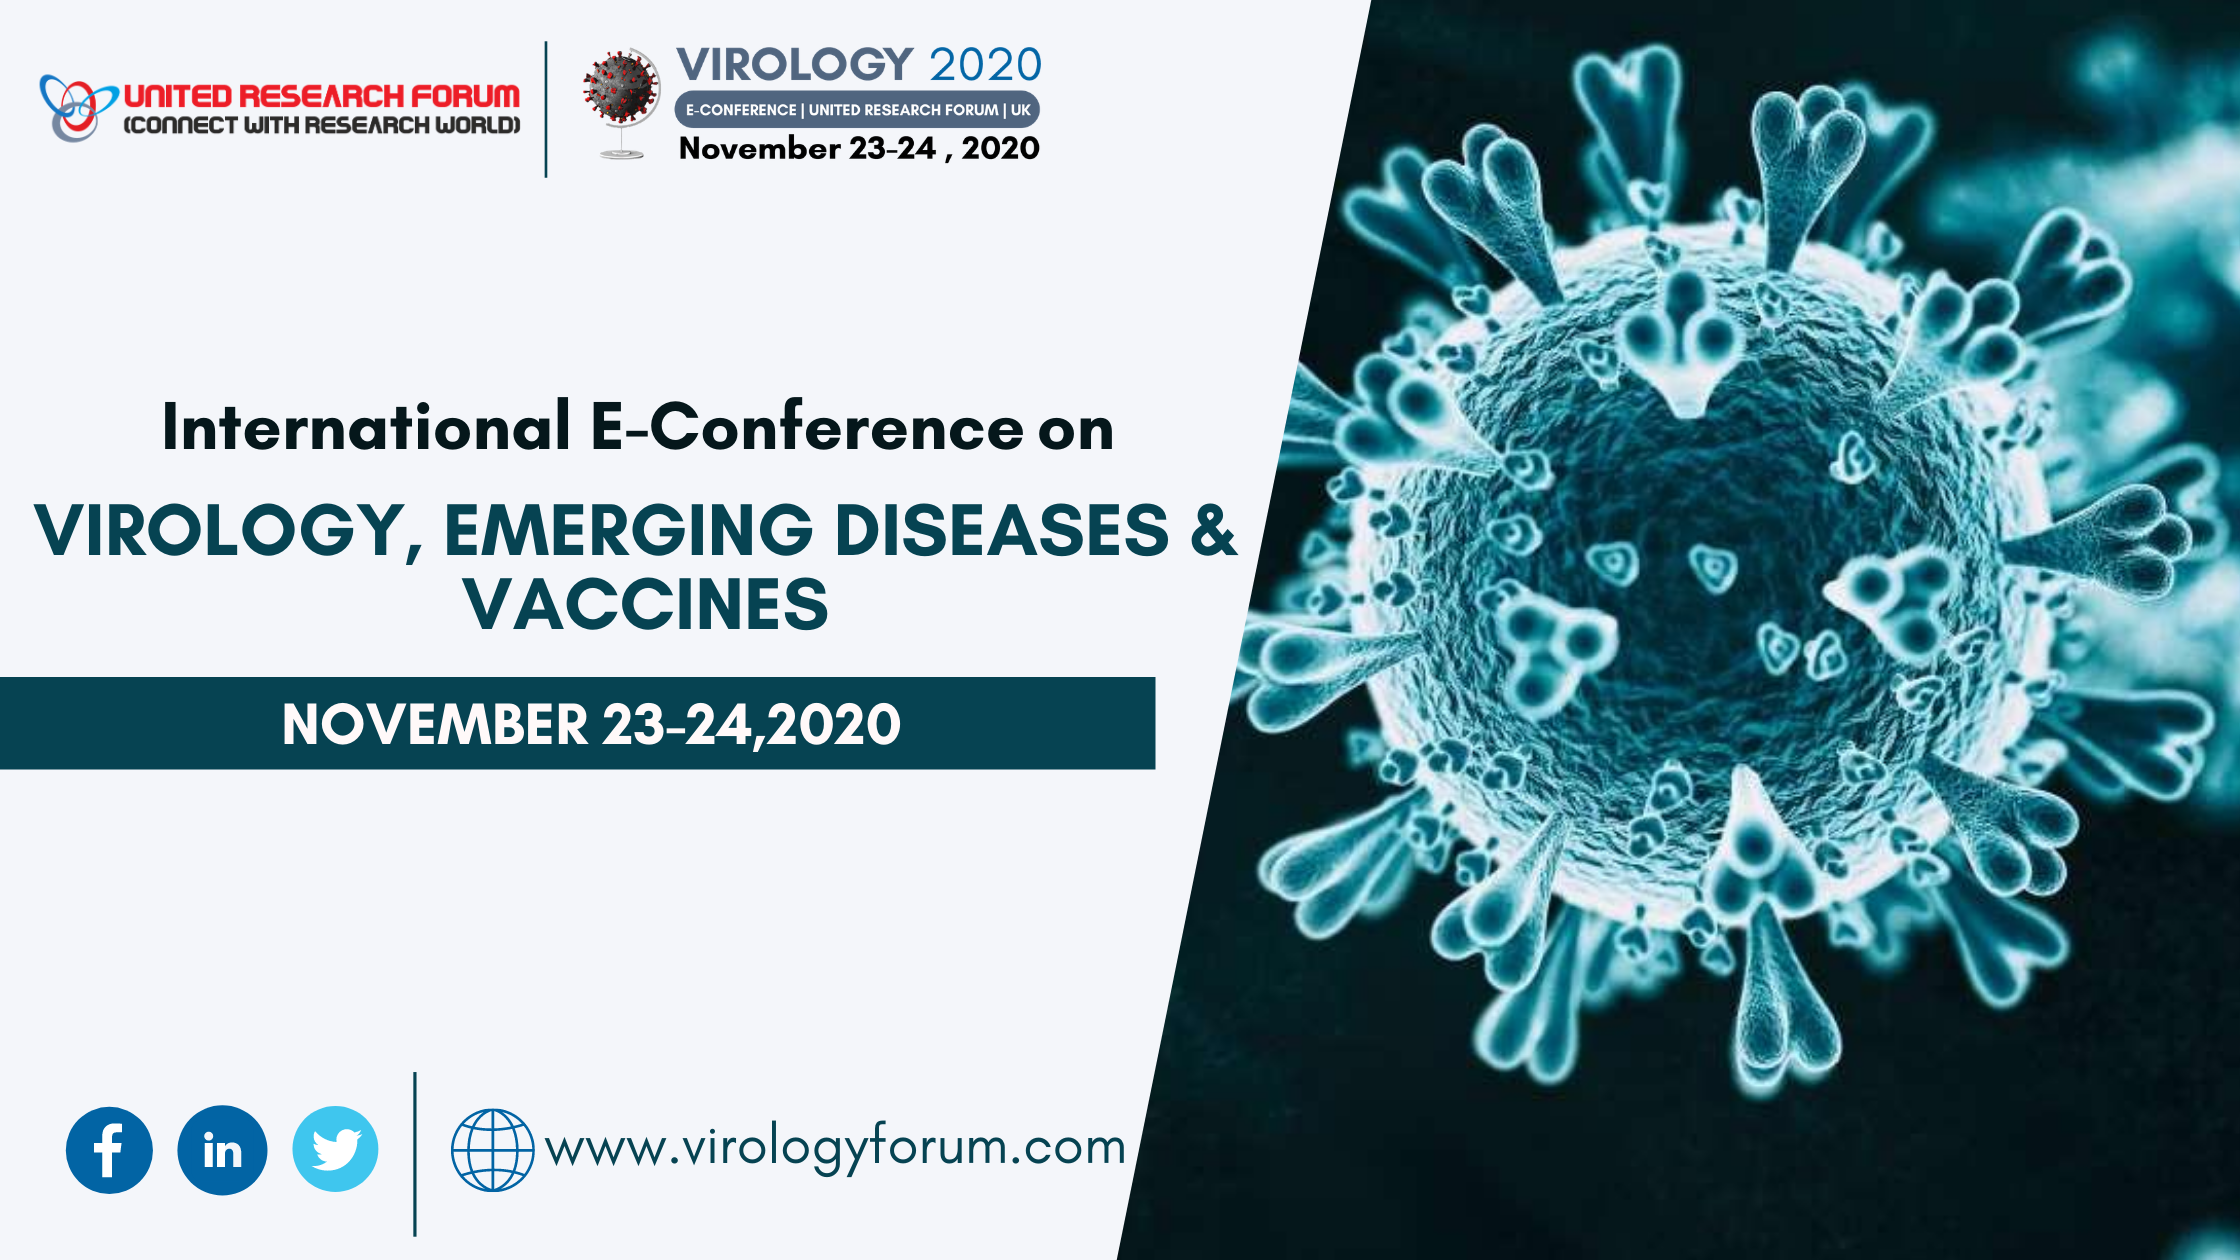 International E-Conference on Virology, Emerging Diseases and Vaccine, Manchester, London, United Kingdom